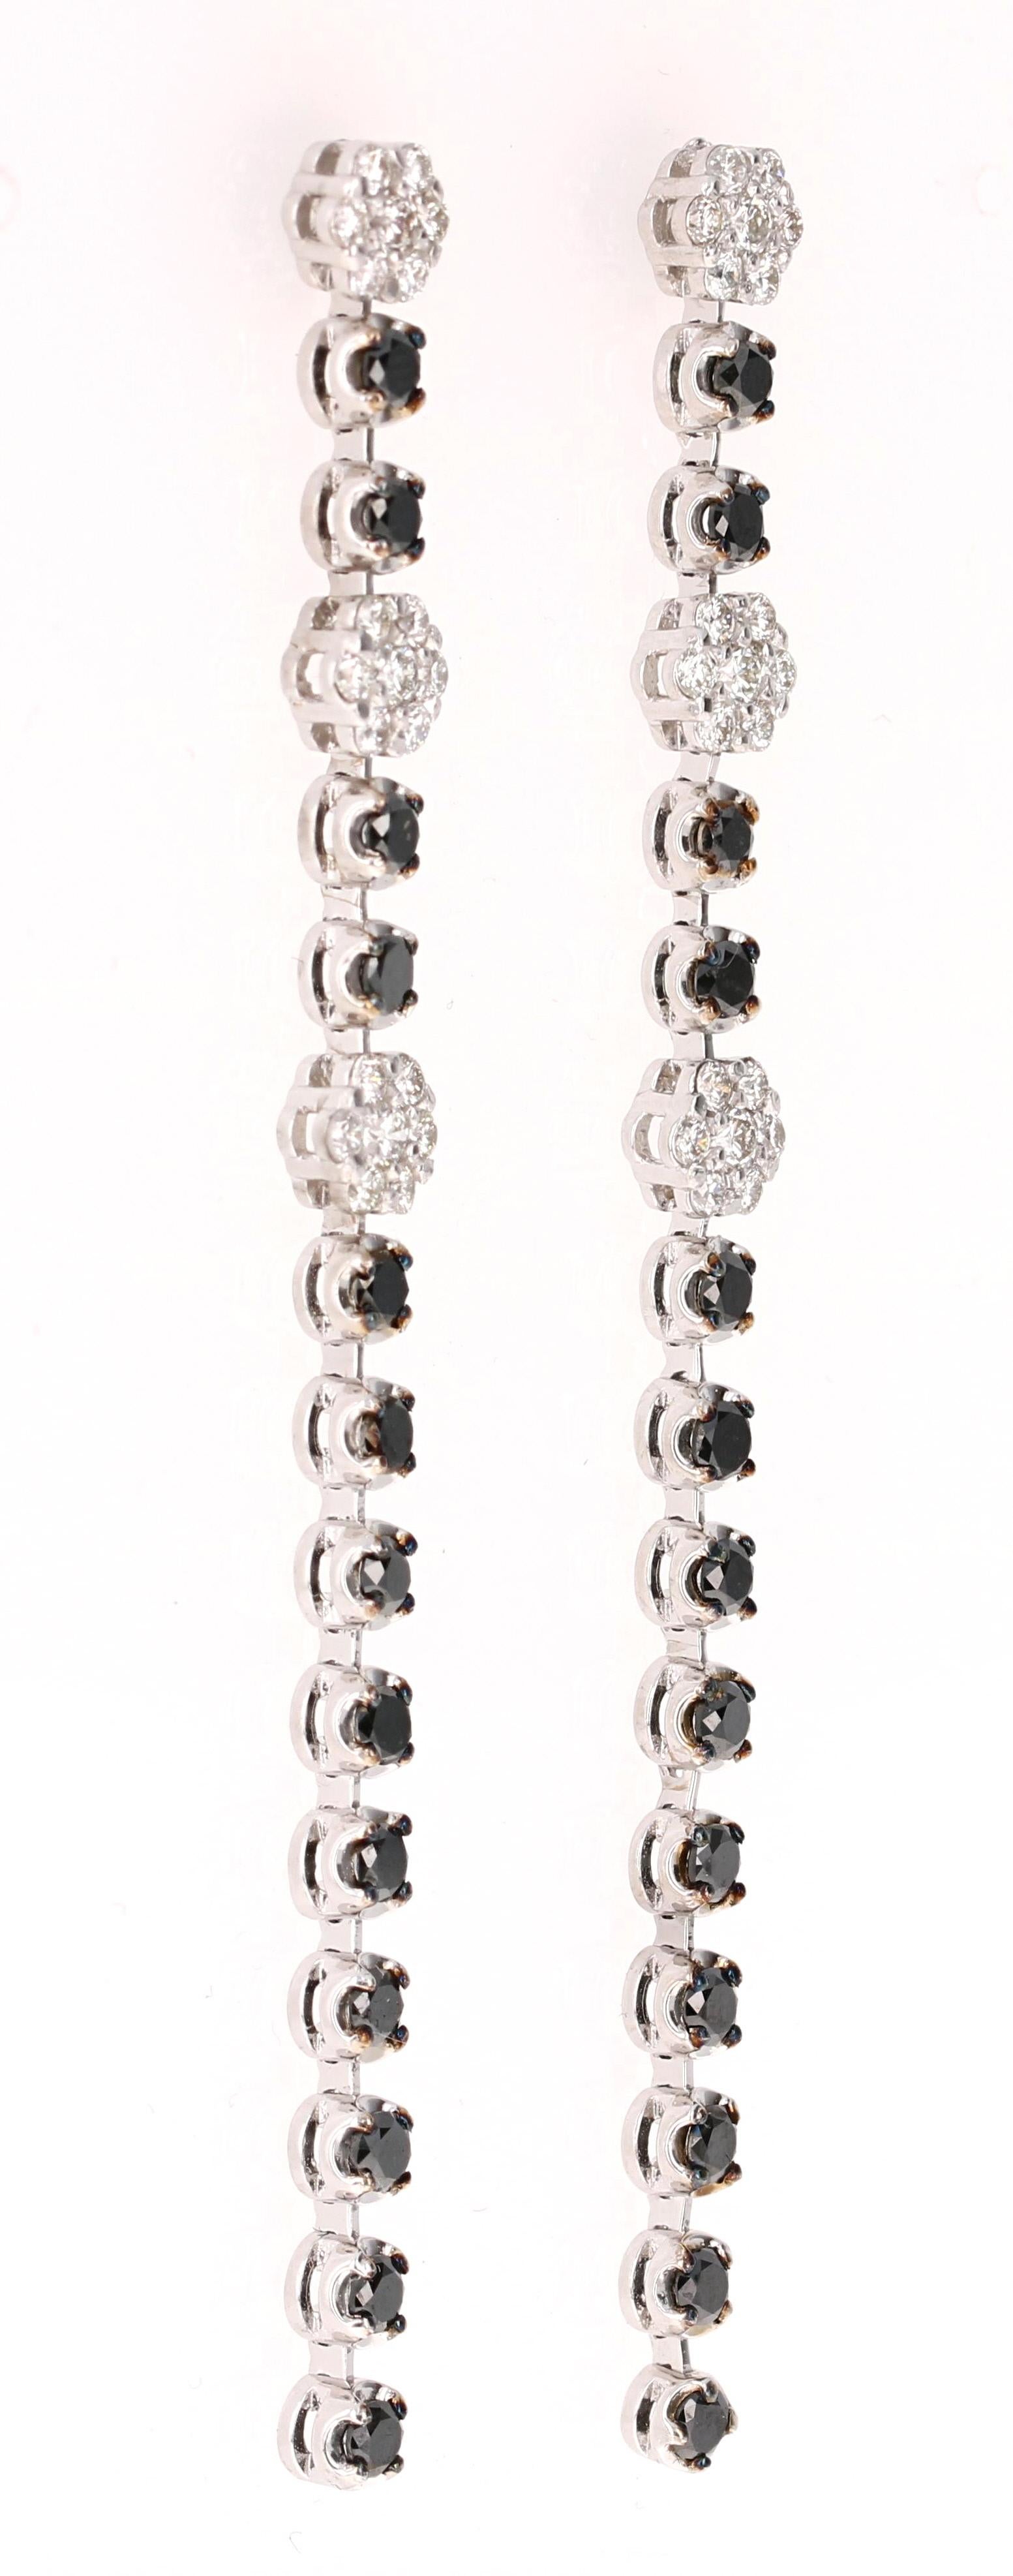 The most stunning Black and White Diamond Earrings! Classy and Chic! 

These beauties have 26 Round Cut Black Diamonds that weigh 1.88 Carats and 42 Round Cut White Diamonds that weigh 0.93 Carats (Clarity: VS, Color: H). The total carat weight of